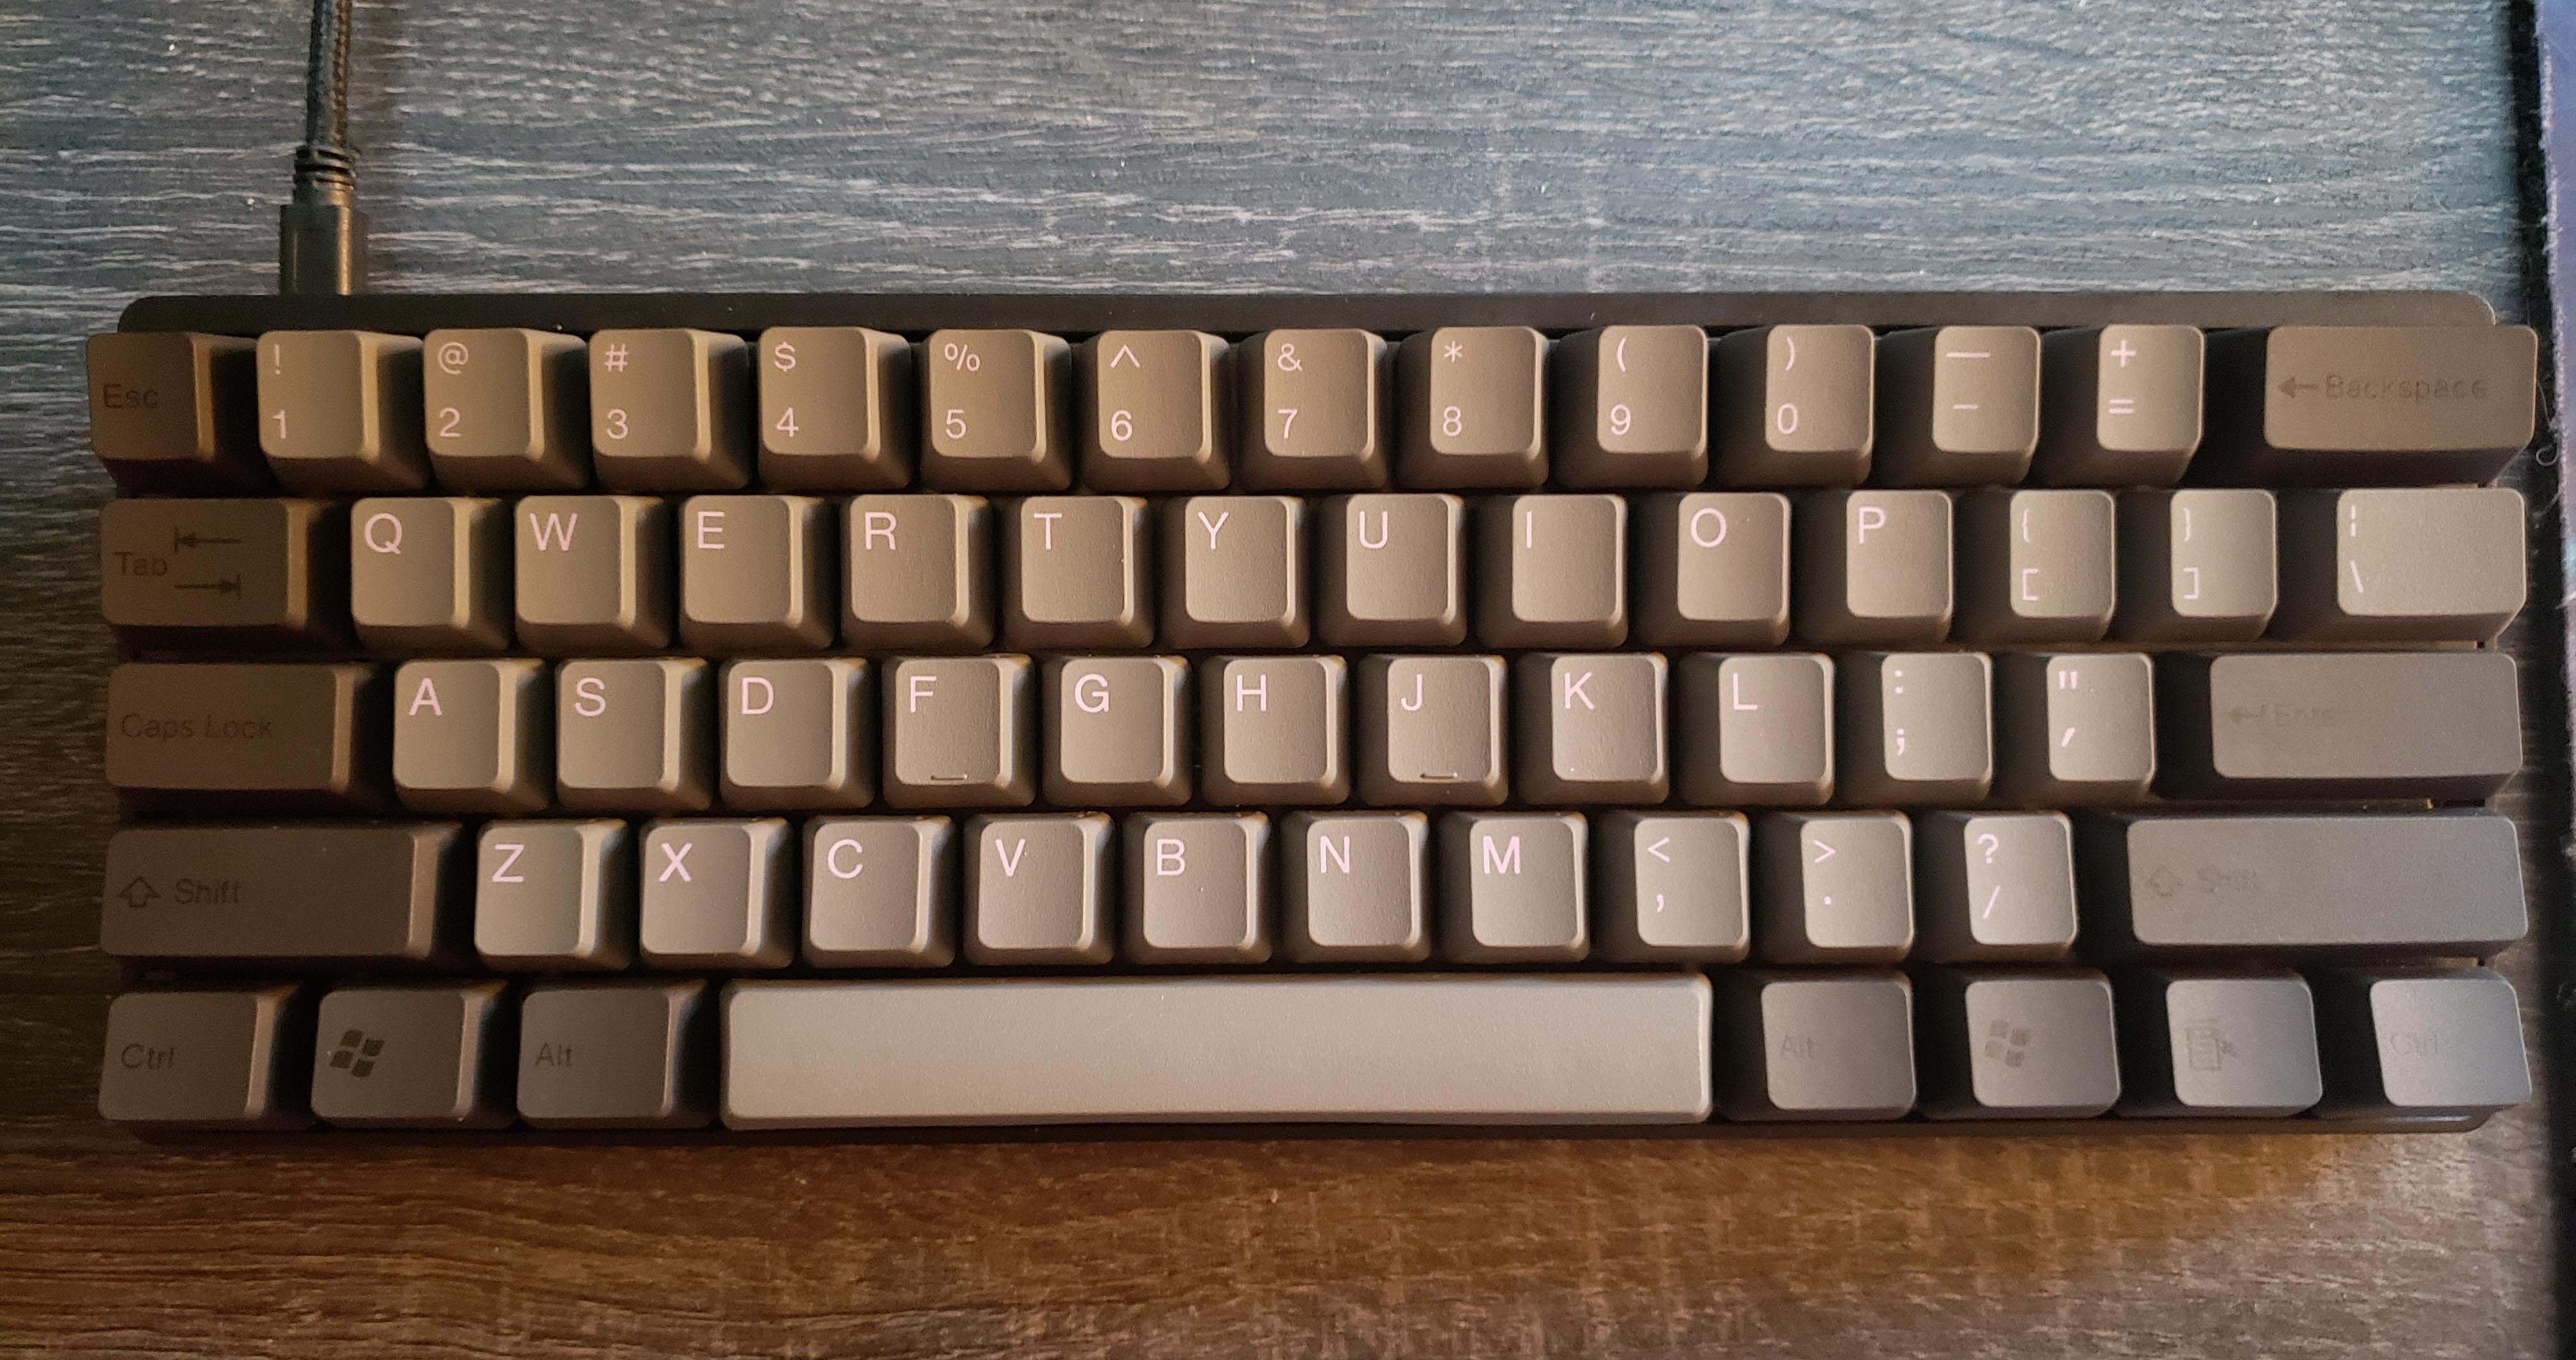 Keyboard on top of a desk showing a brownish pattern, with some keys darker and others lighter